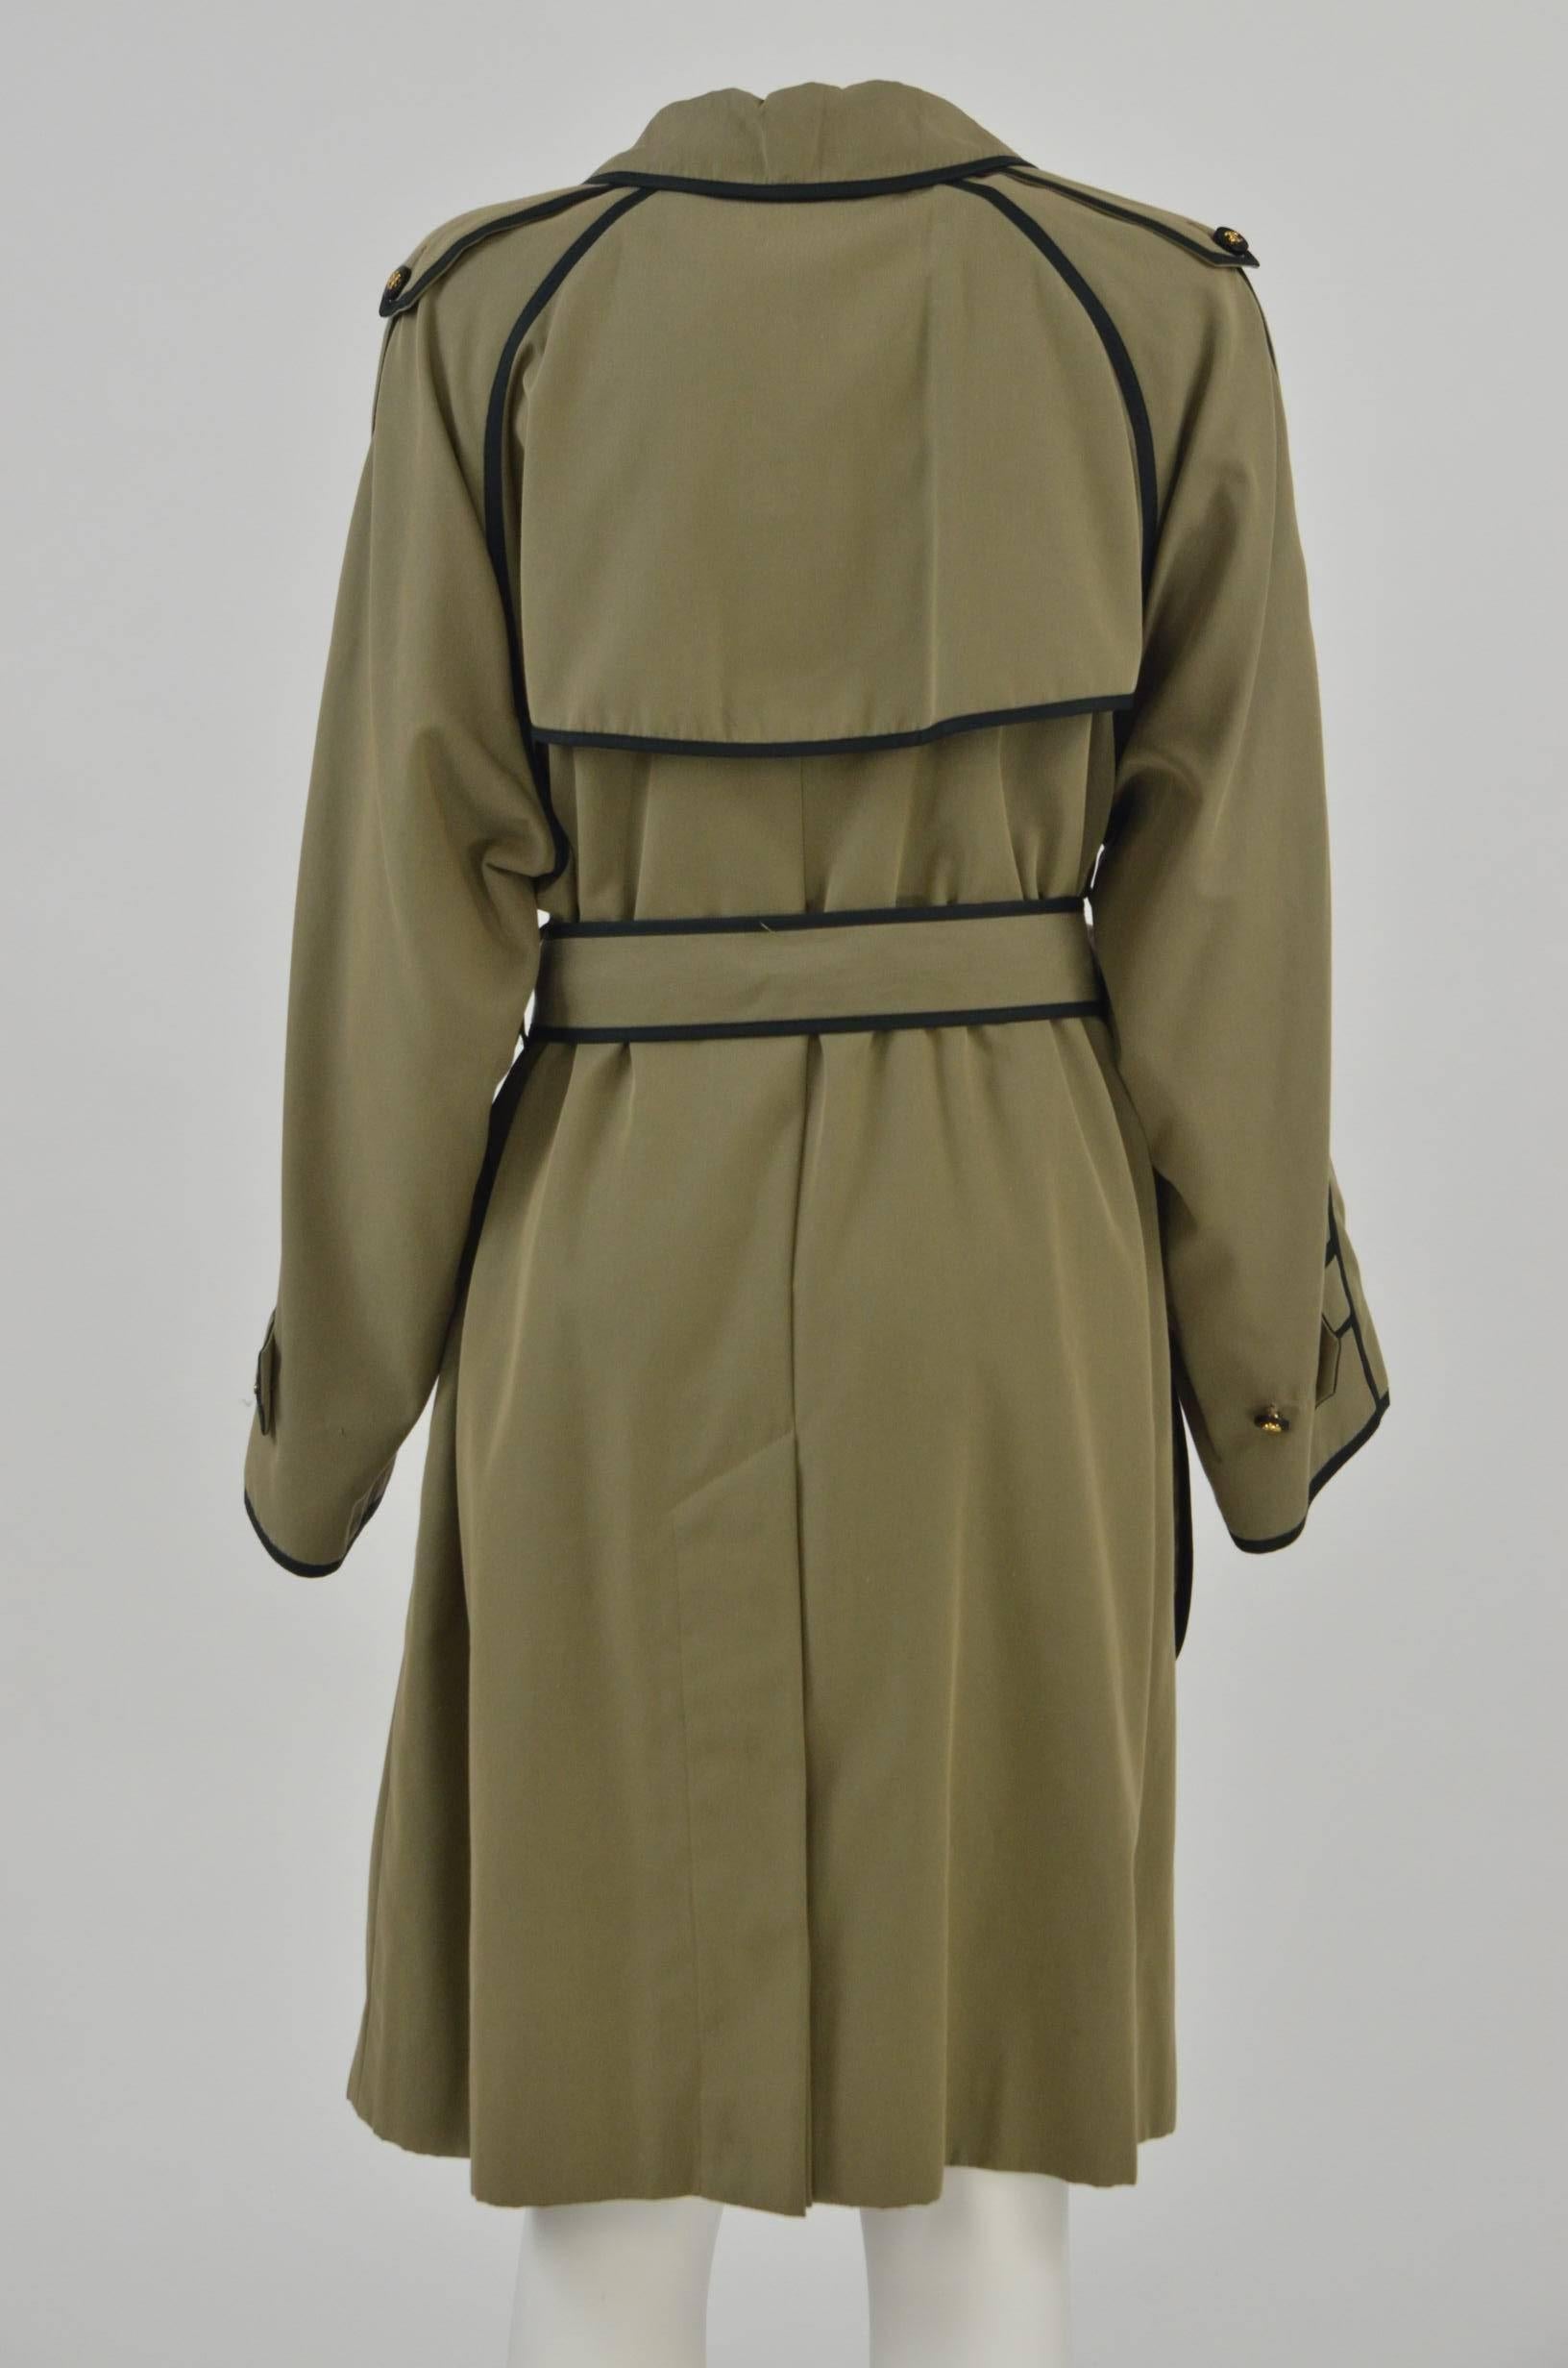 Khaki green cotton trench coat by Chanel featuring a peter pan collar, single chest flap, a contrast double-breasted front button fastening, black trim detailing, two side buttoned flap pockets, flap at the rear of the neck, rear vent and long